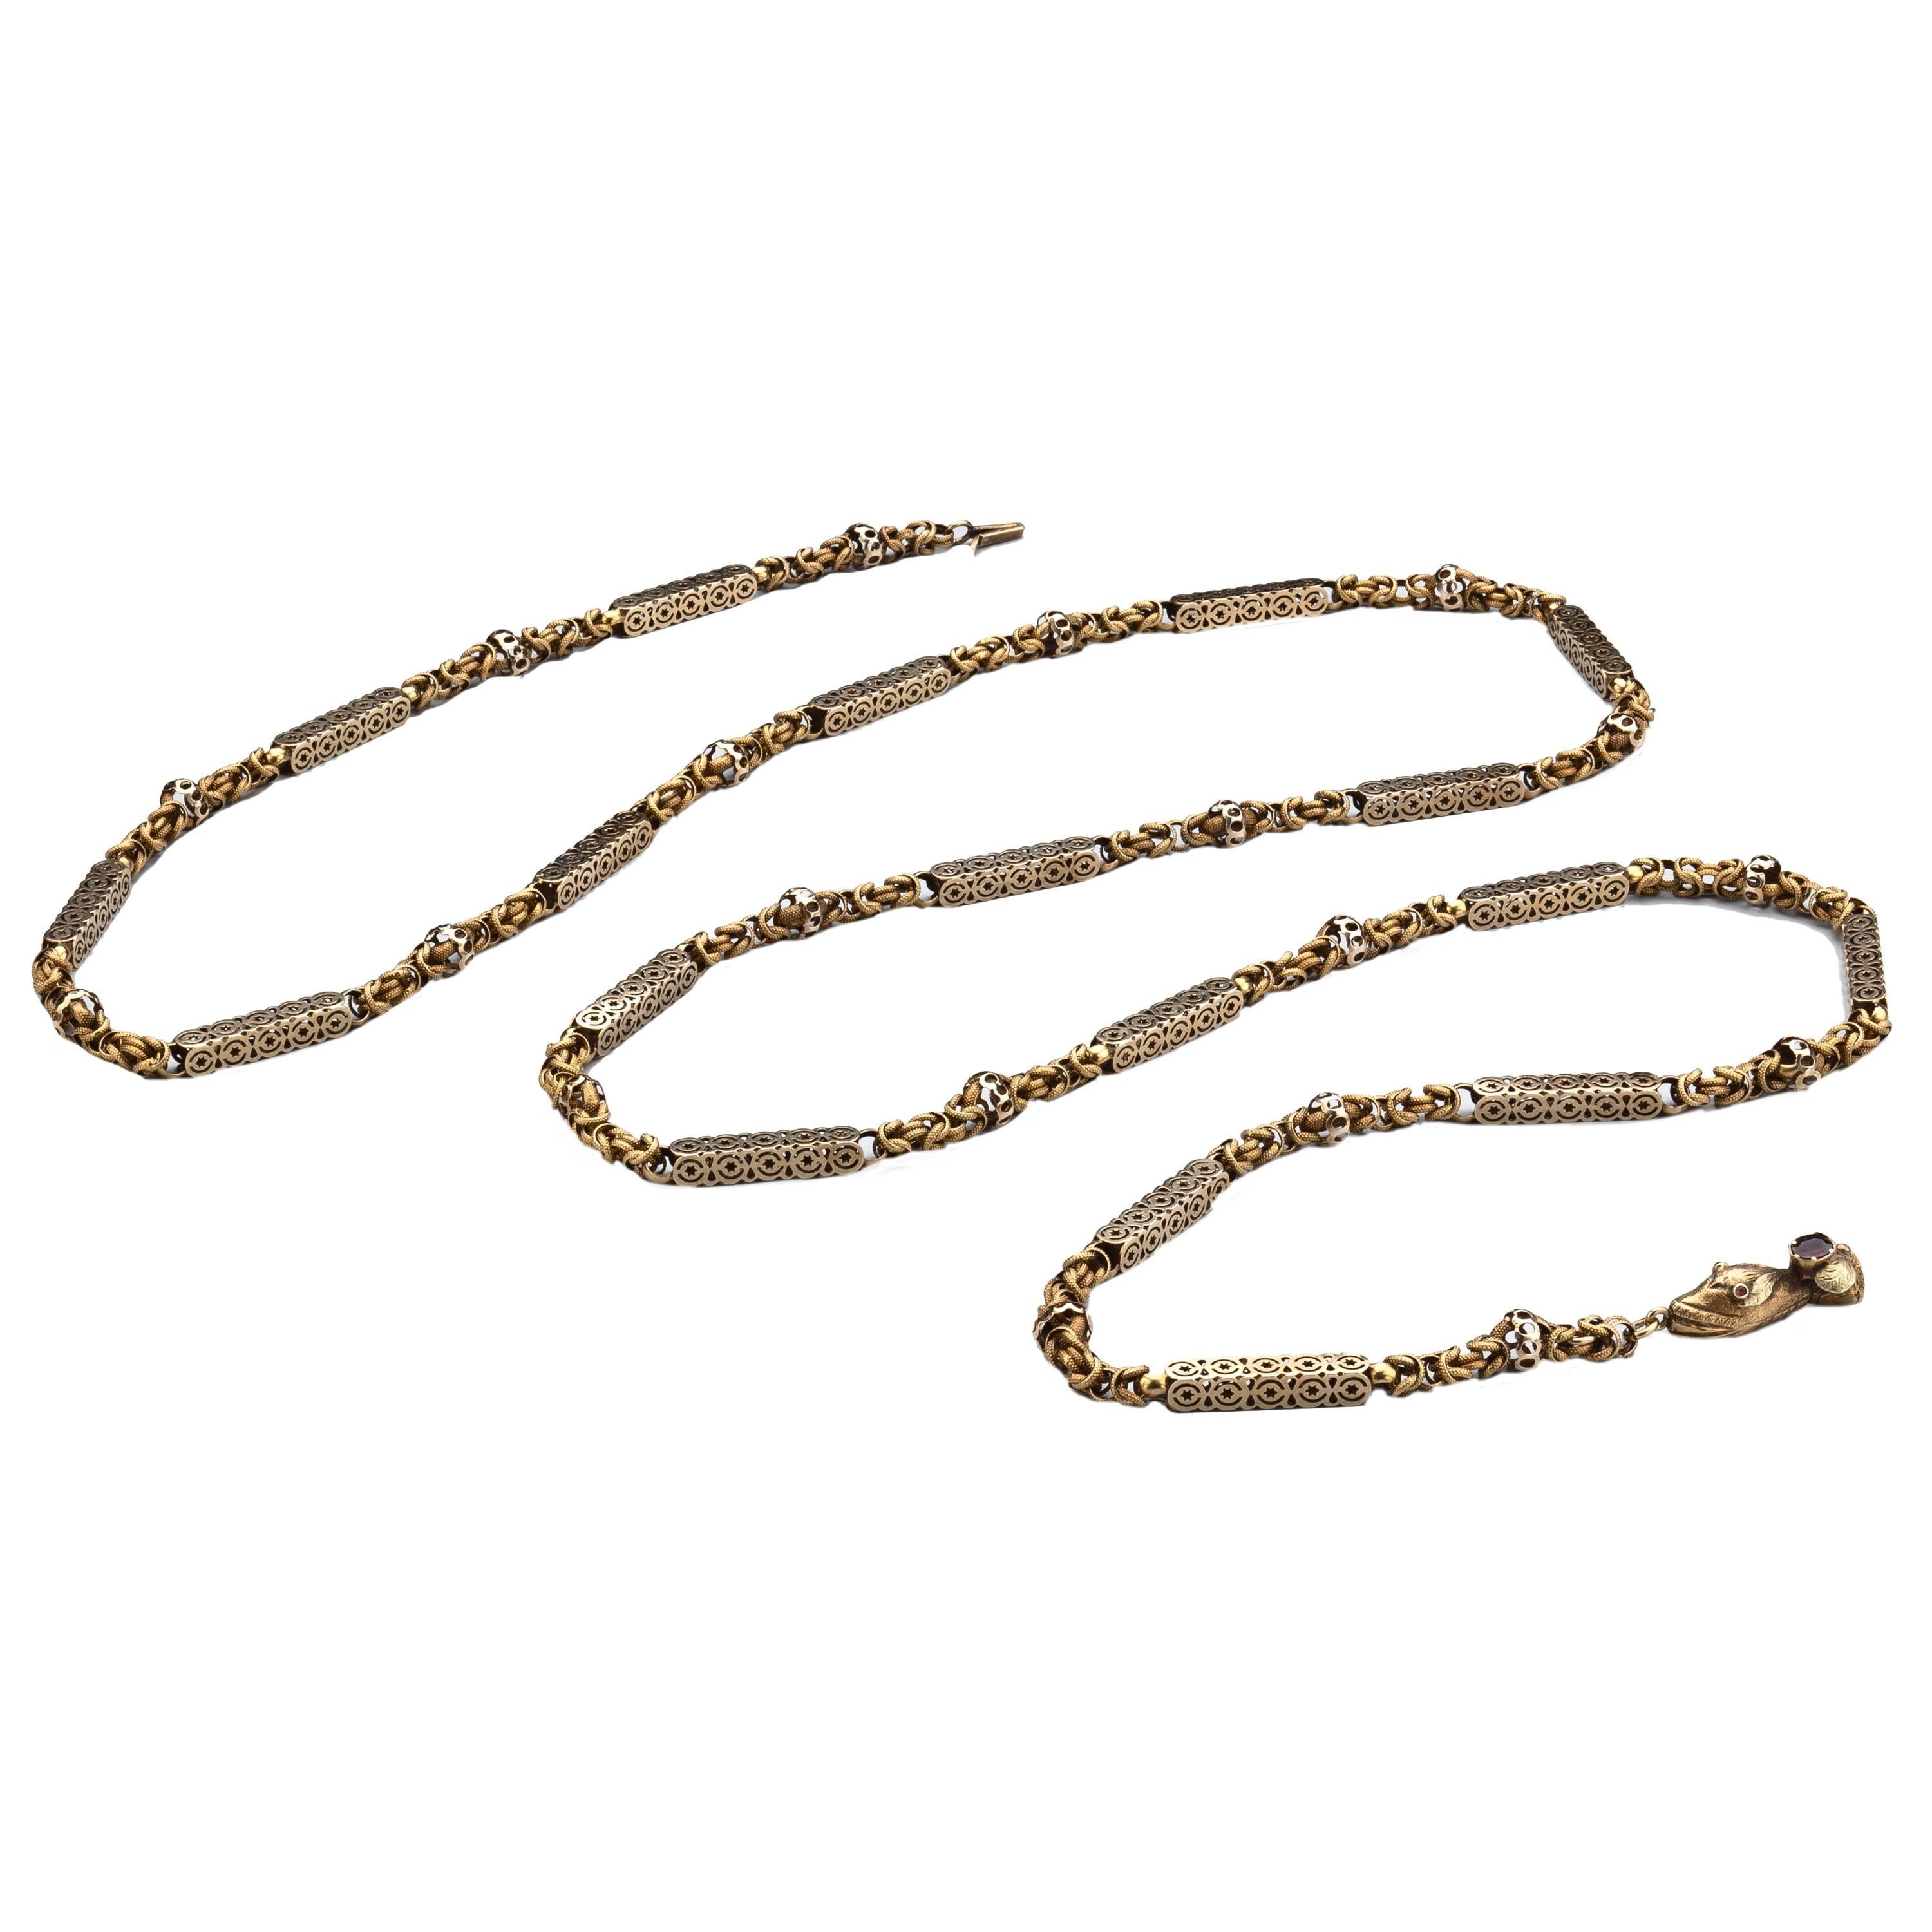 1850s Antique Gold Snake Chain For Sale